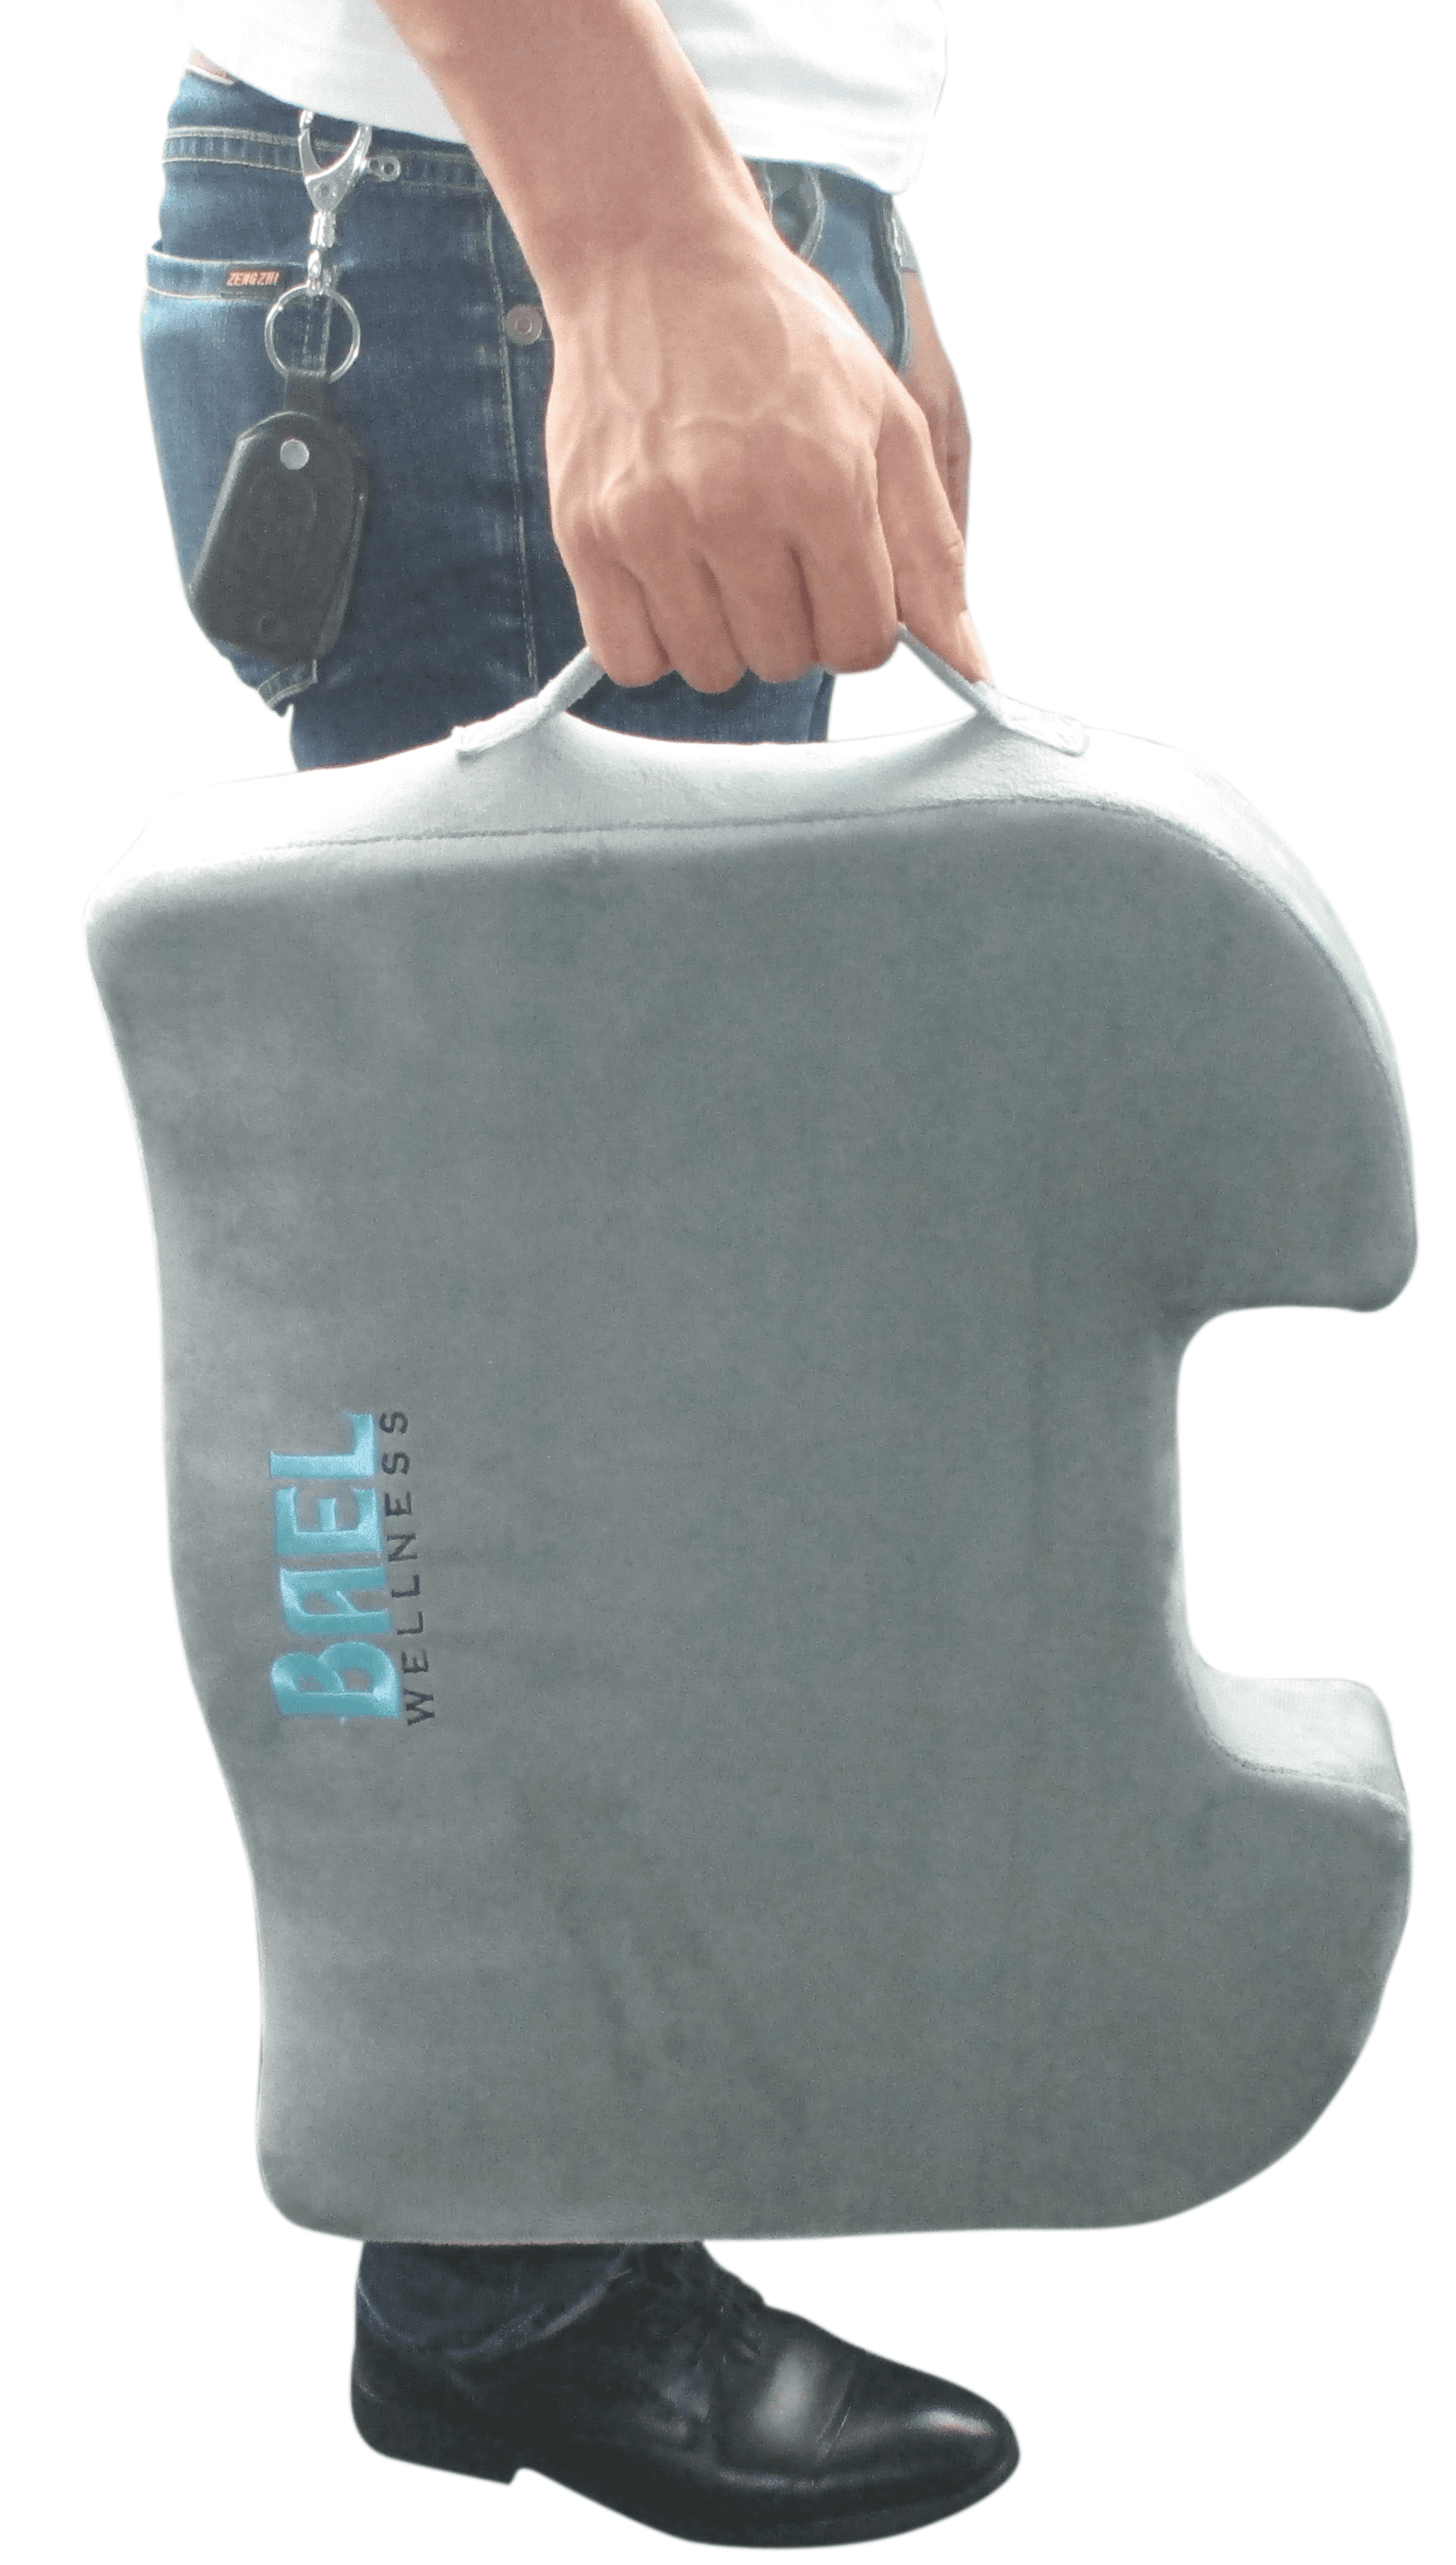 BAEL WELLNESS Premium Orthopedic Seat Cushion for Back Pain and Sciatica  Relief (1)